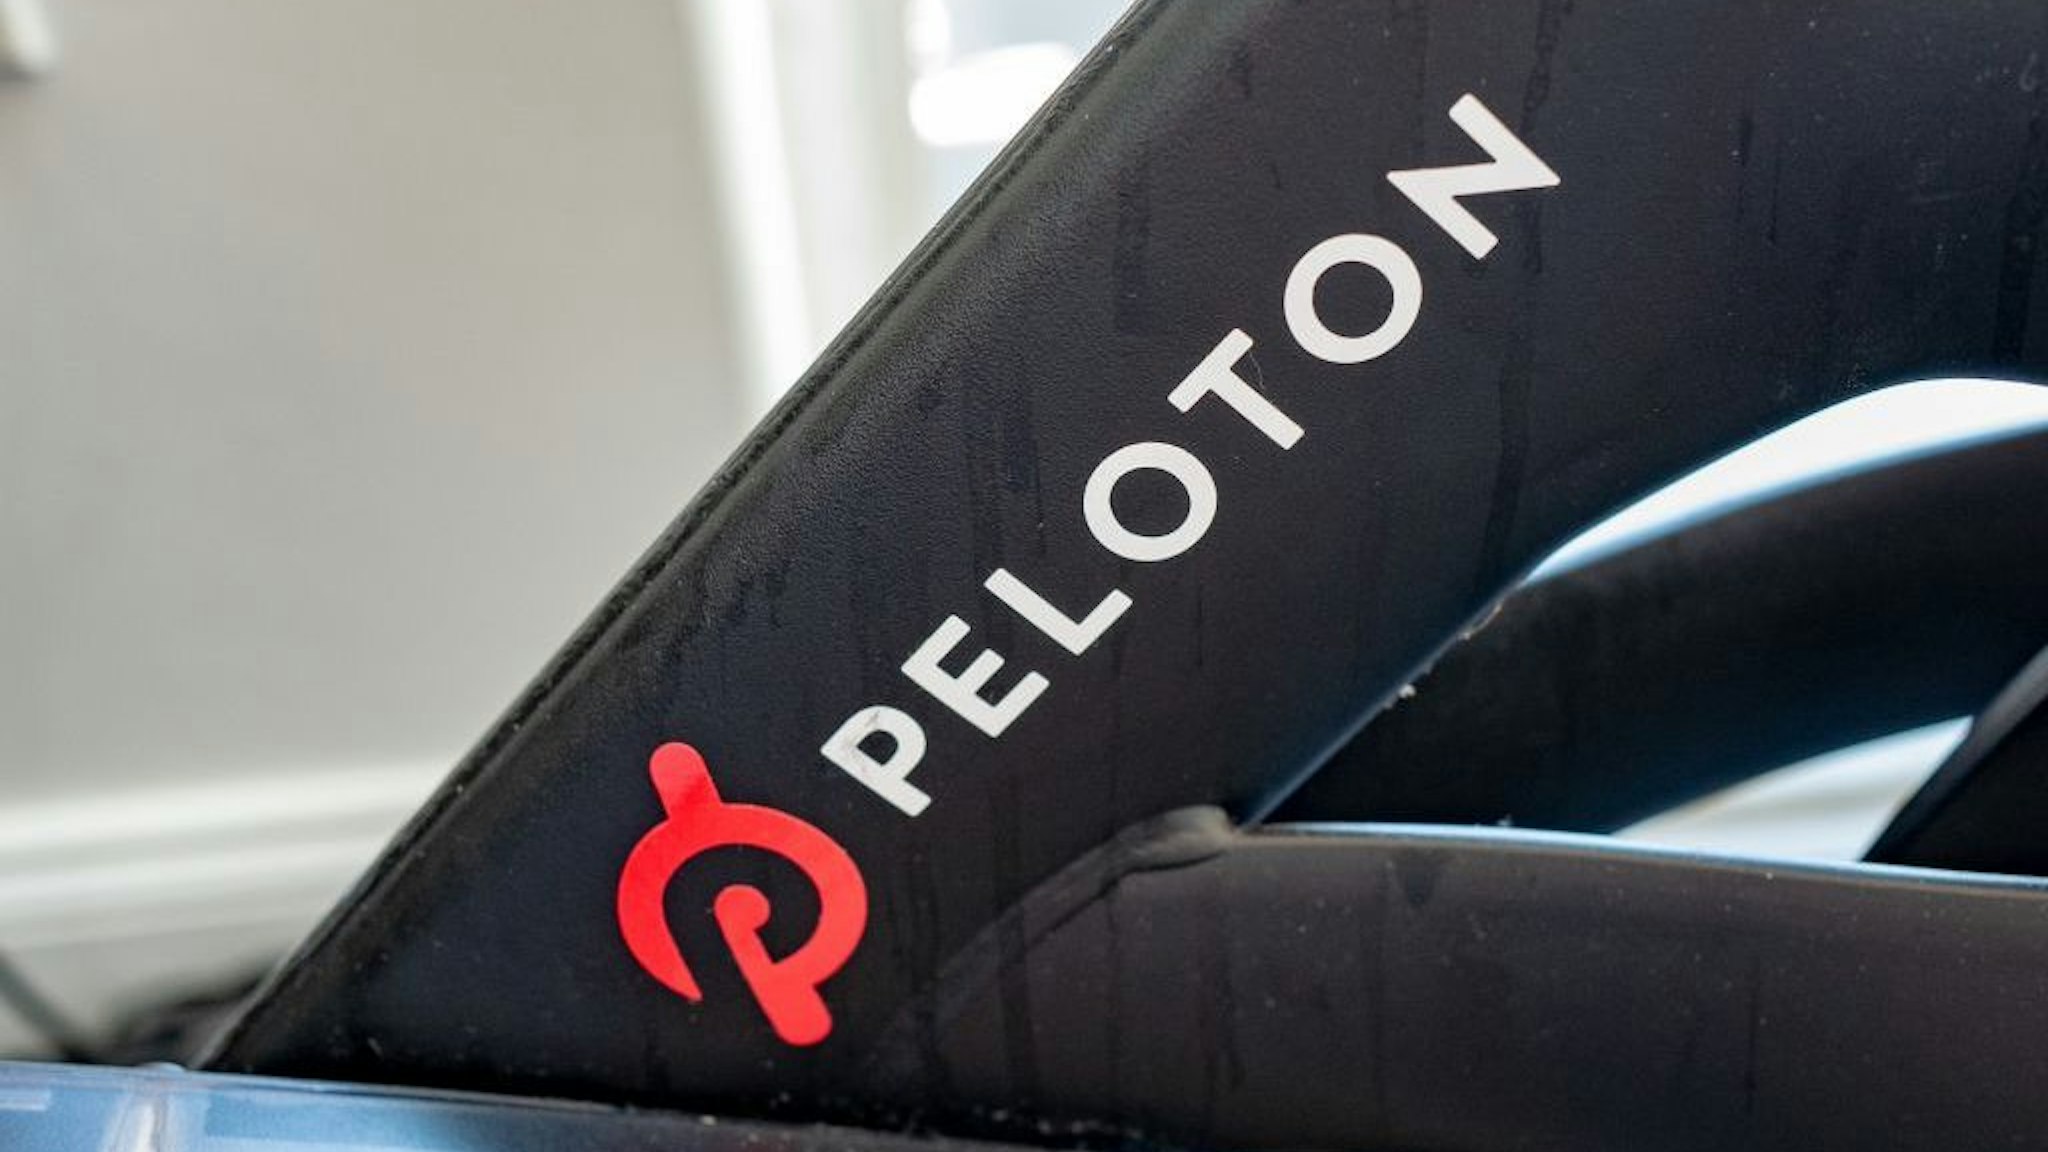 Close-up of logo for Peloton on exercise bicycle, San Francisco, California, June 14, 2021. (Photo by Smith Collection/Gado/Getty Images)